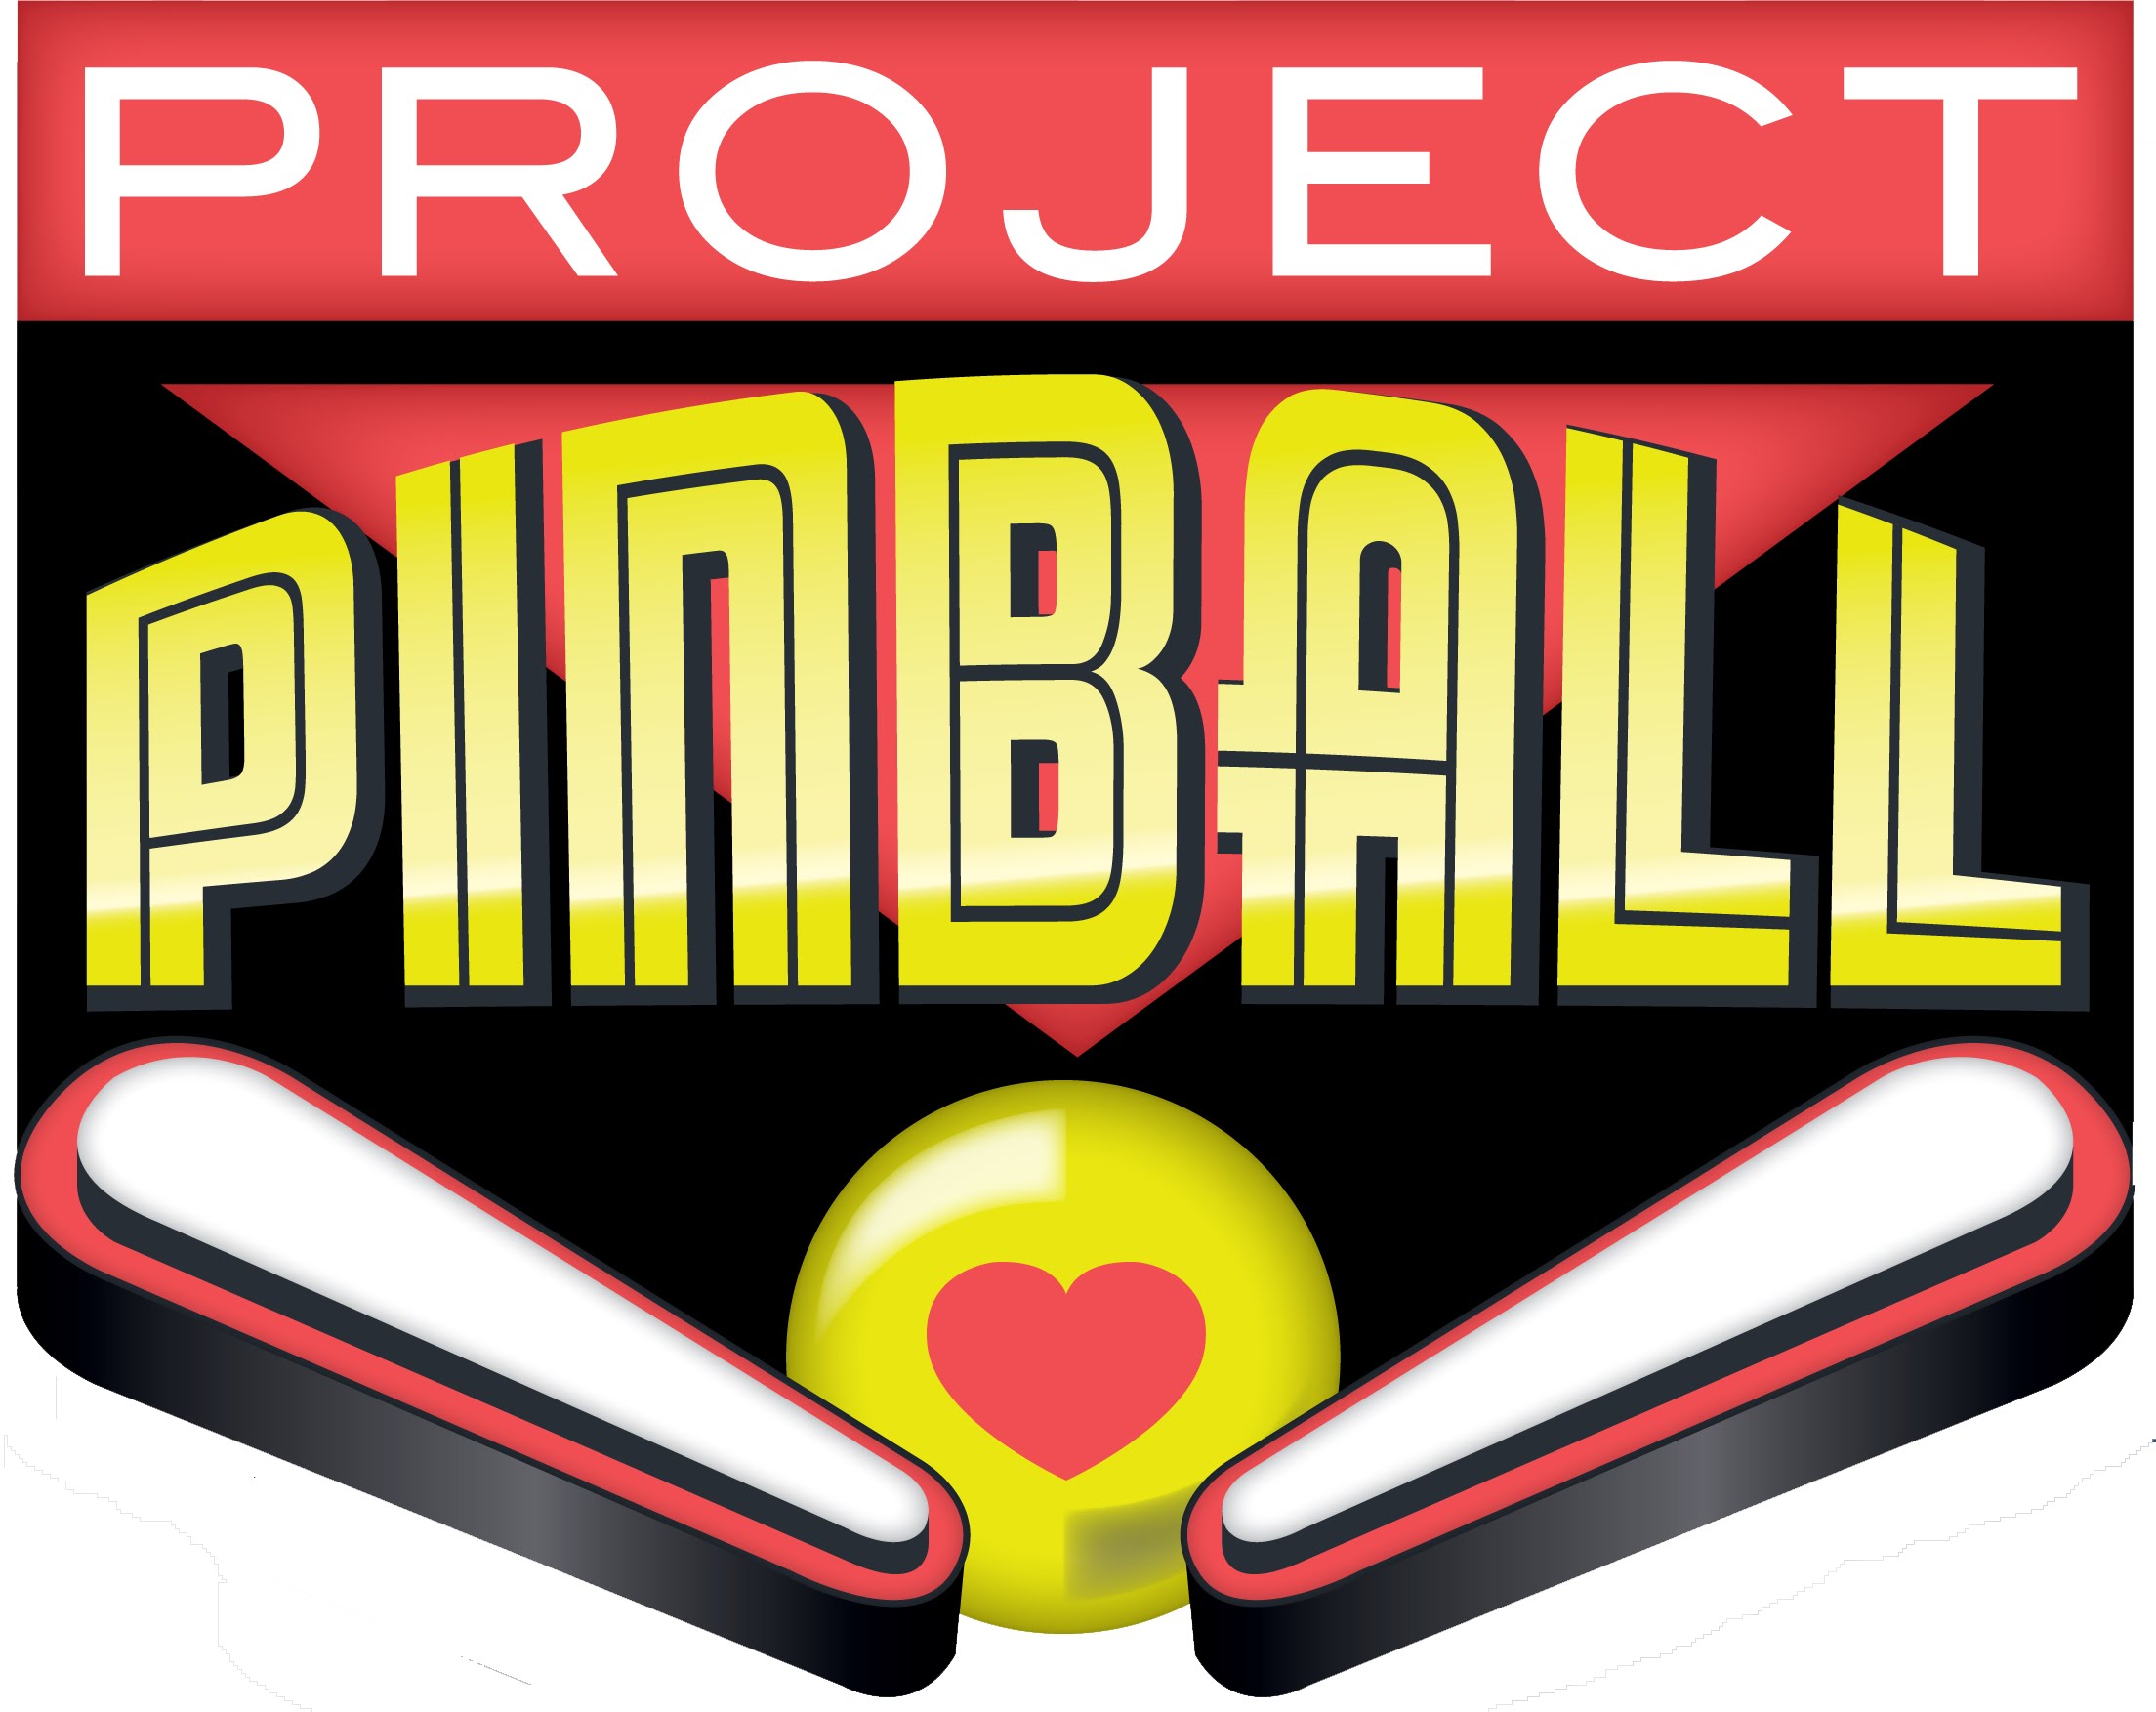 24-Hour Stream-A-Thon for Project Pinball Charity Today at 6 PM Central!